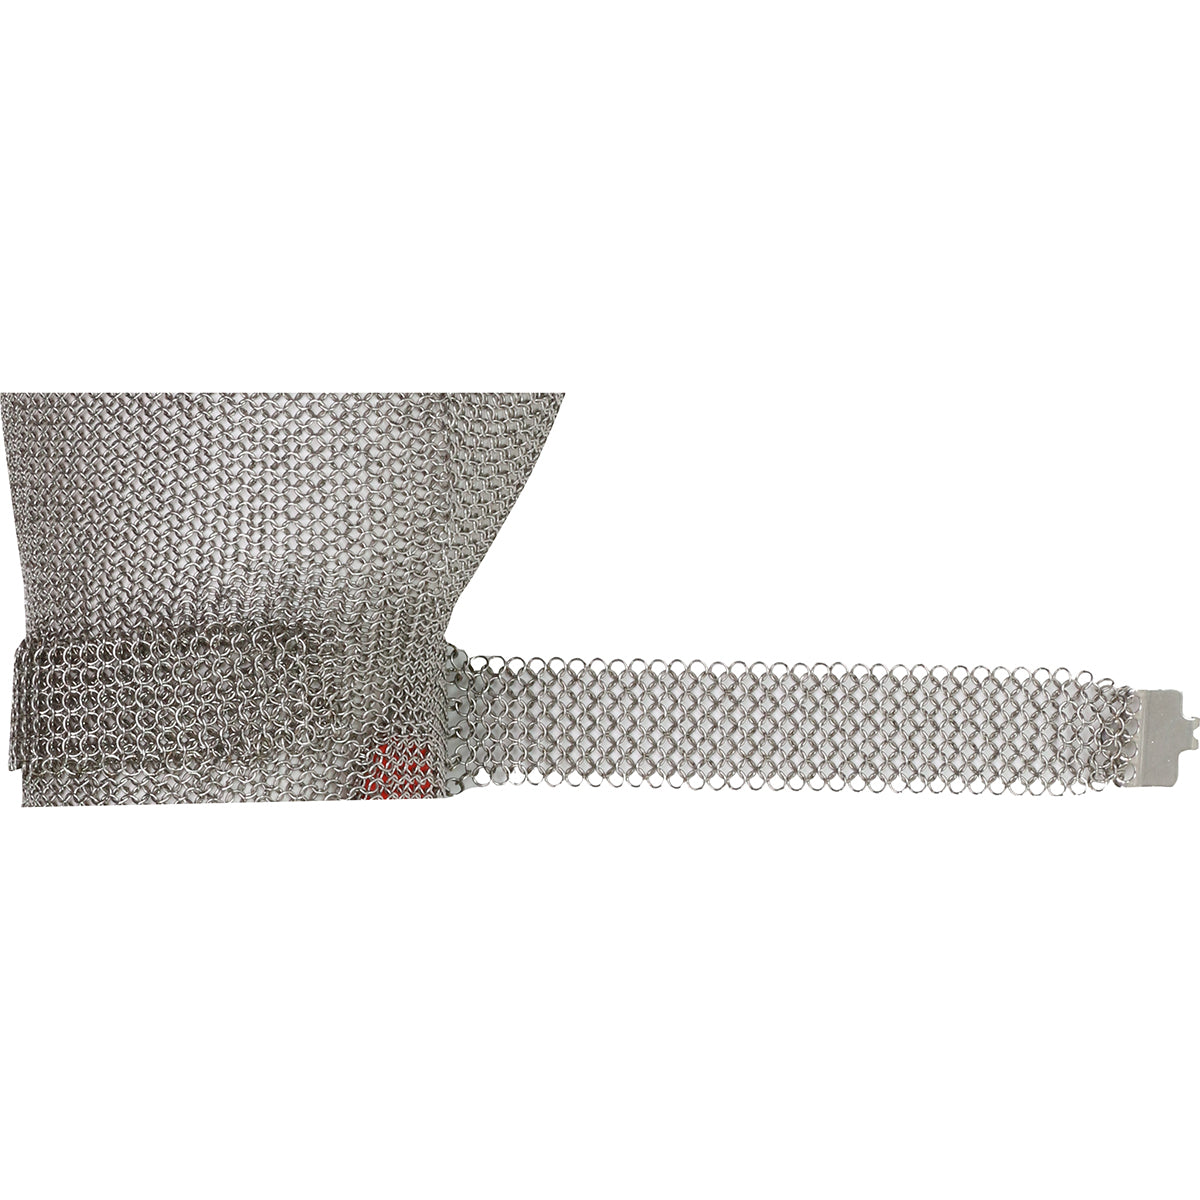 US Mesh USM-1547-XXL Stainless Steel Mesh Glove with Spring Closure - Forearm Length